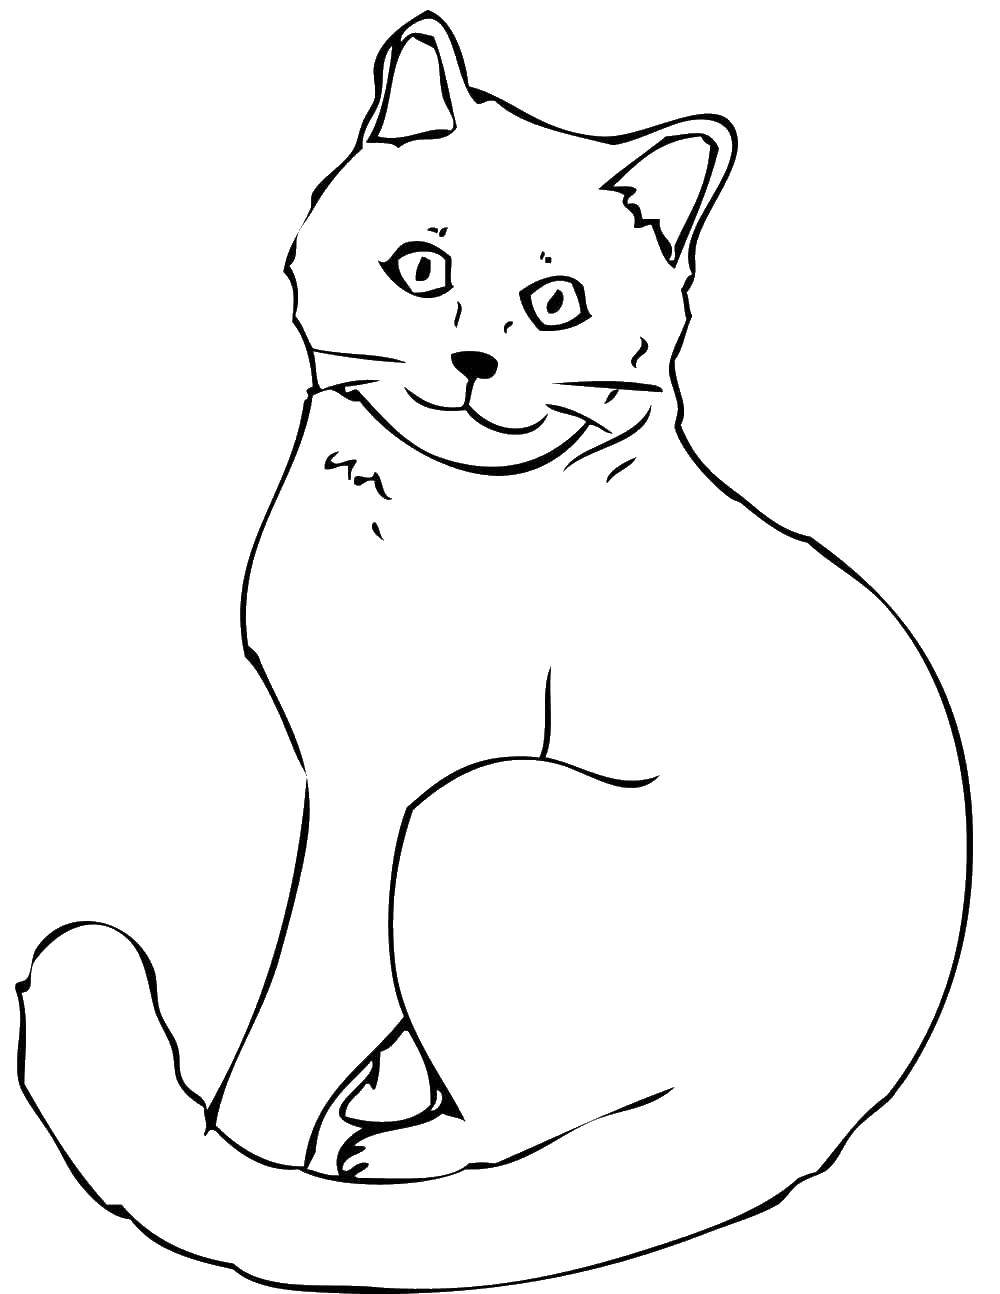 Coloring The outline of the cat. Category kittens and puppies. Tags:  the cat.